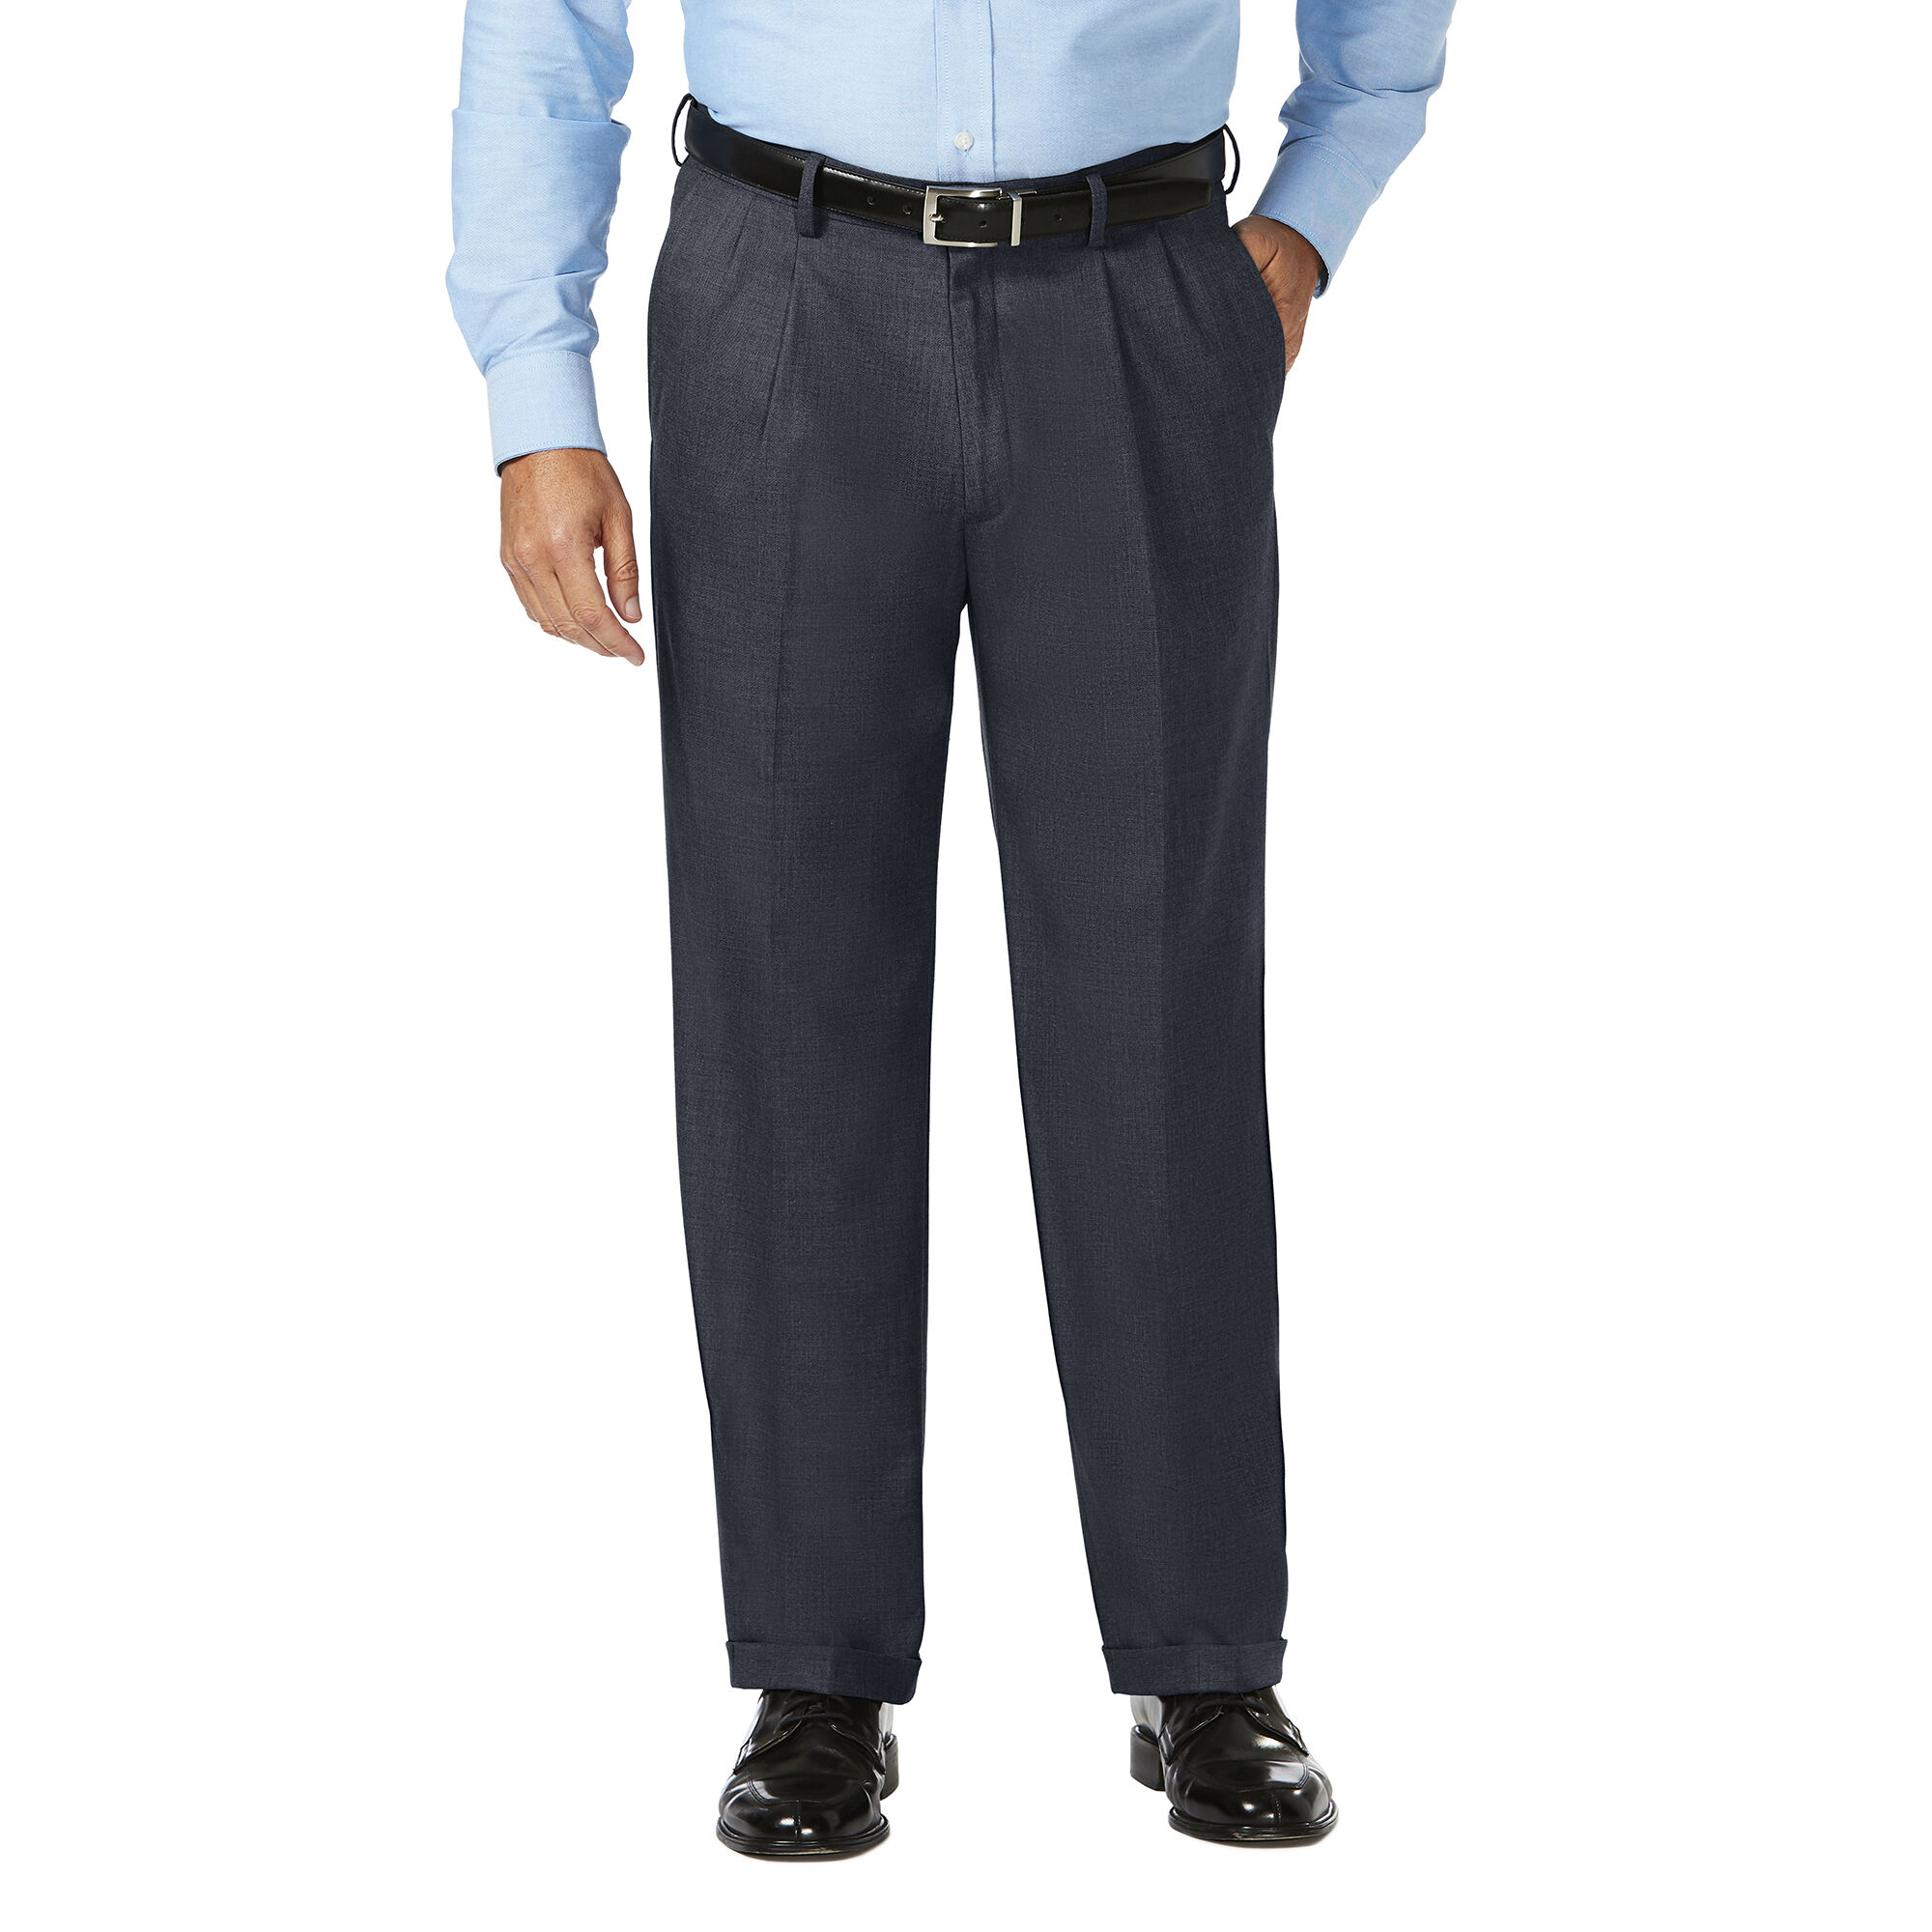 Big & Tall J.M. Haggar Dress Pant - Sharkskin Dark Navy Classic Fit Big & Tall Pleated Front Hidden Expandable Waistband Cuffed Hook and Bar Closure 64% Polyester, 34% Viscoe Rayon 2% Spandex Dry Clean Only Imported Style #: HD90654 Size - M